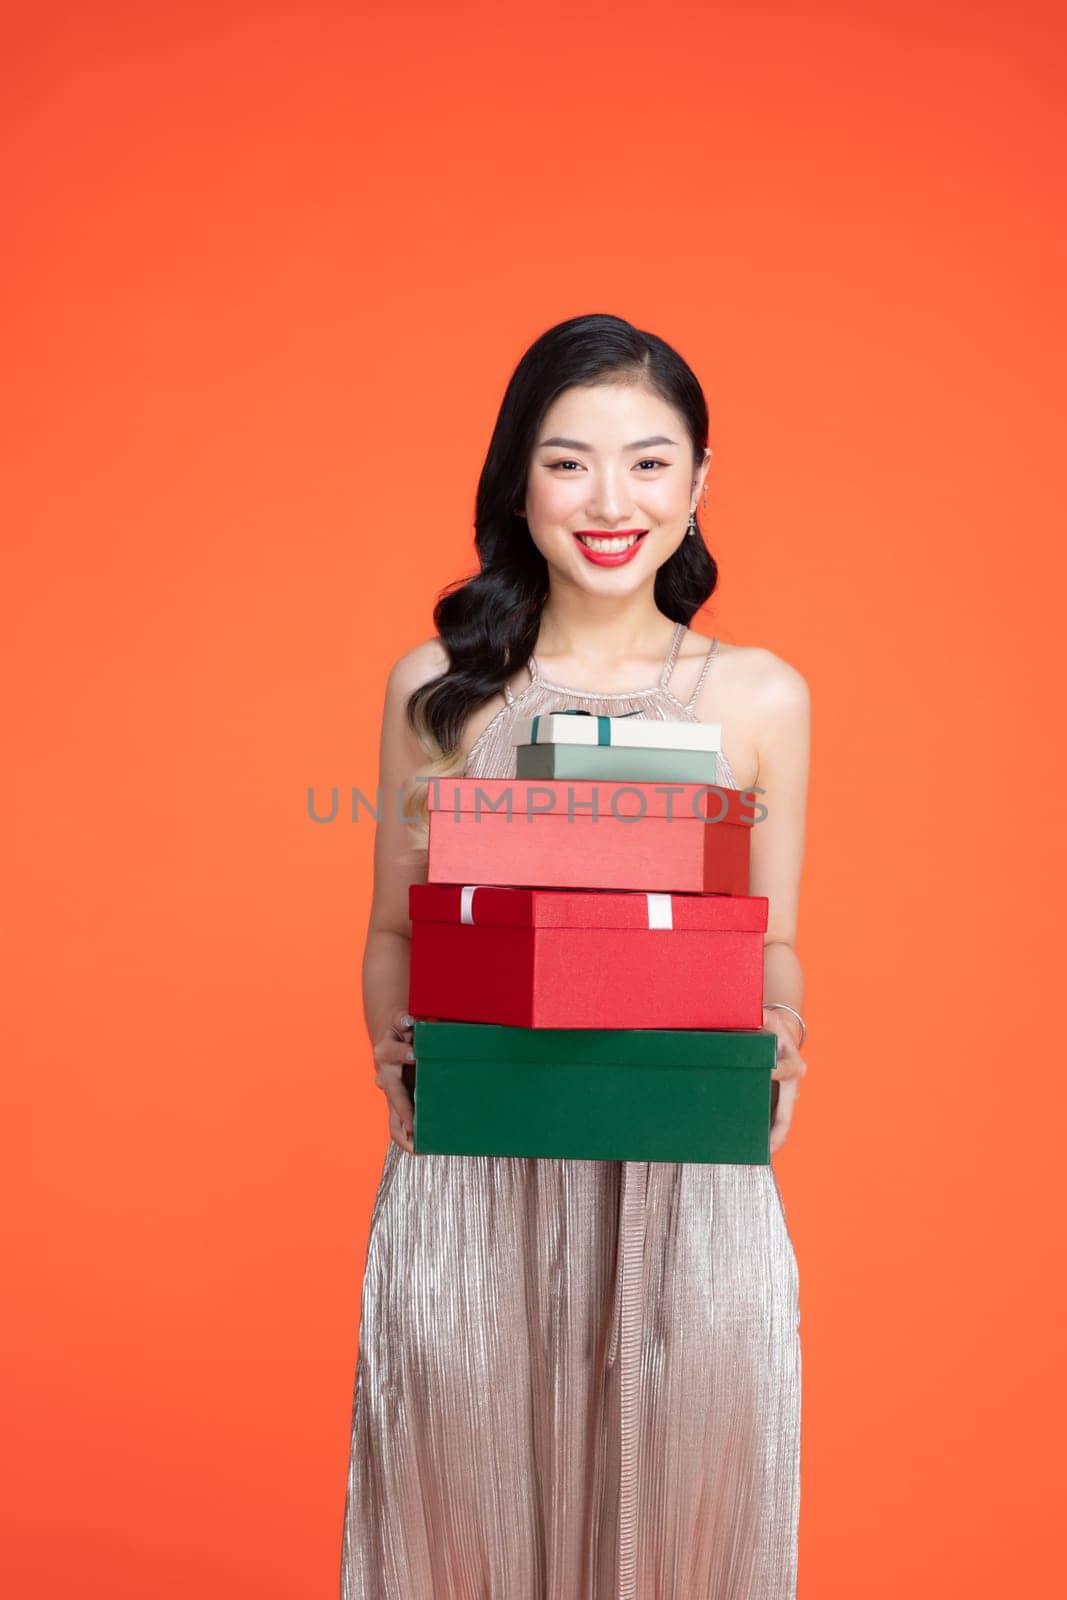 Cheerful young woman in shiny dress holding heap of presents on red background by makidotvn